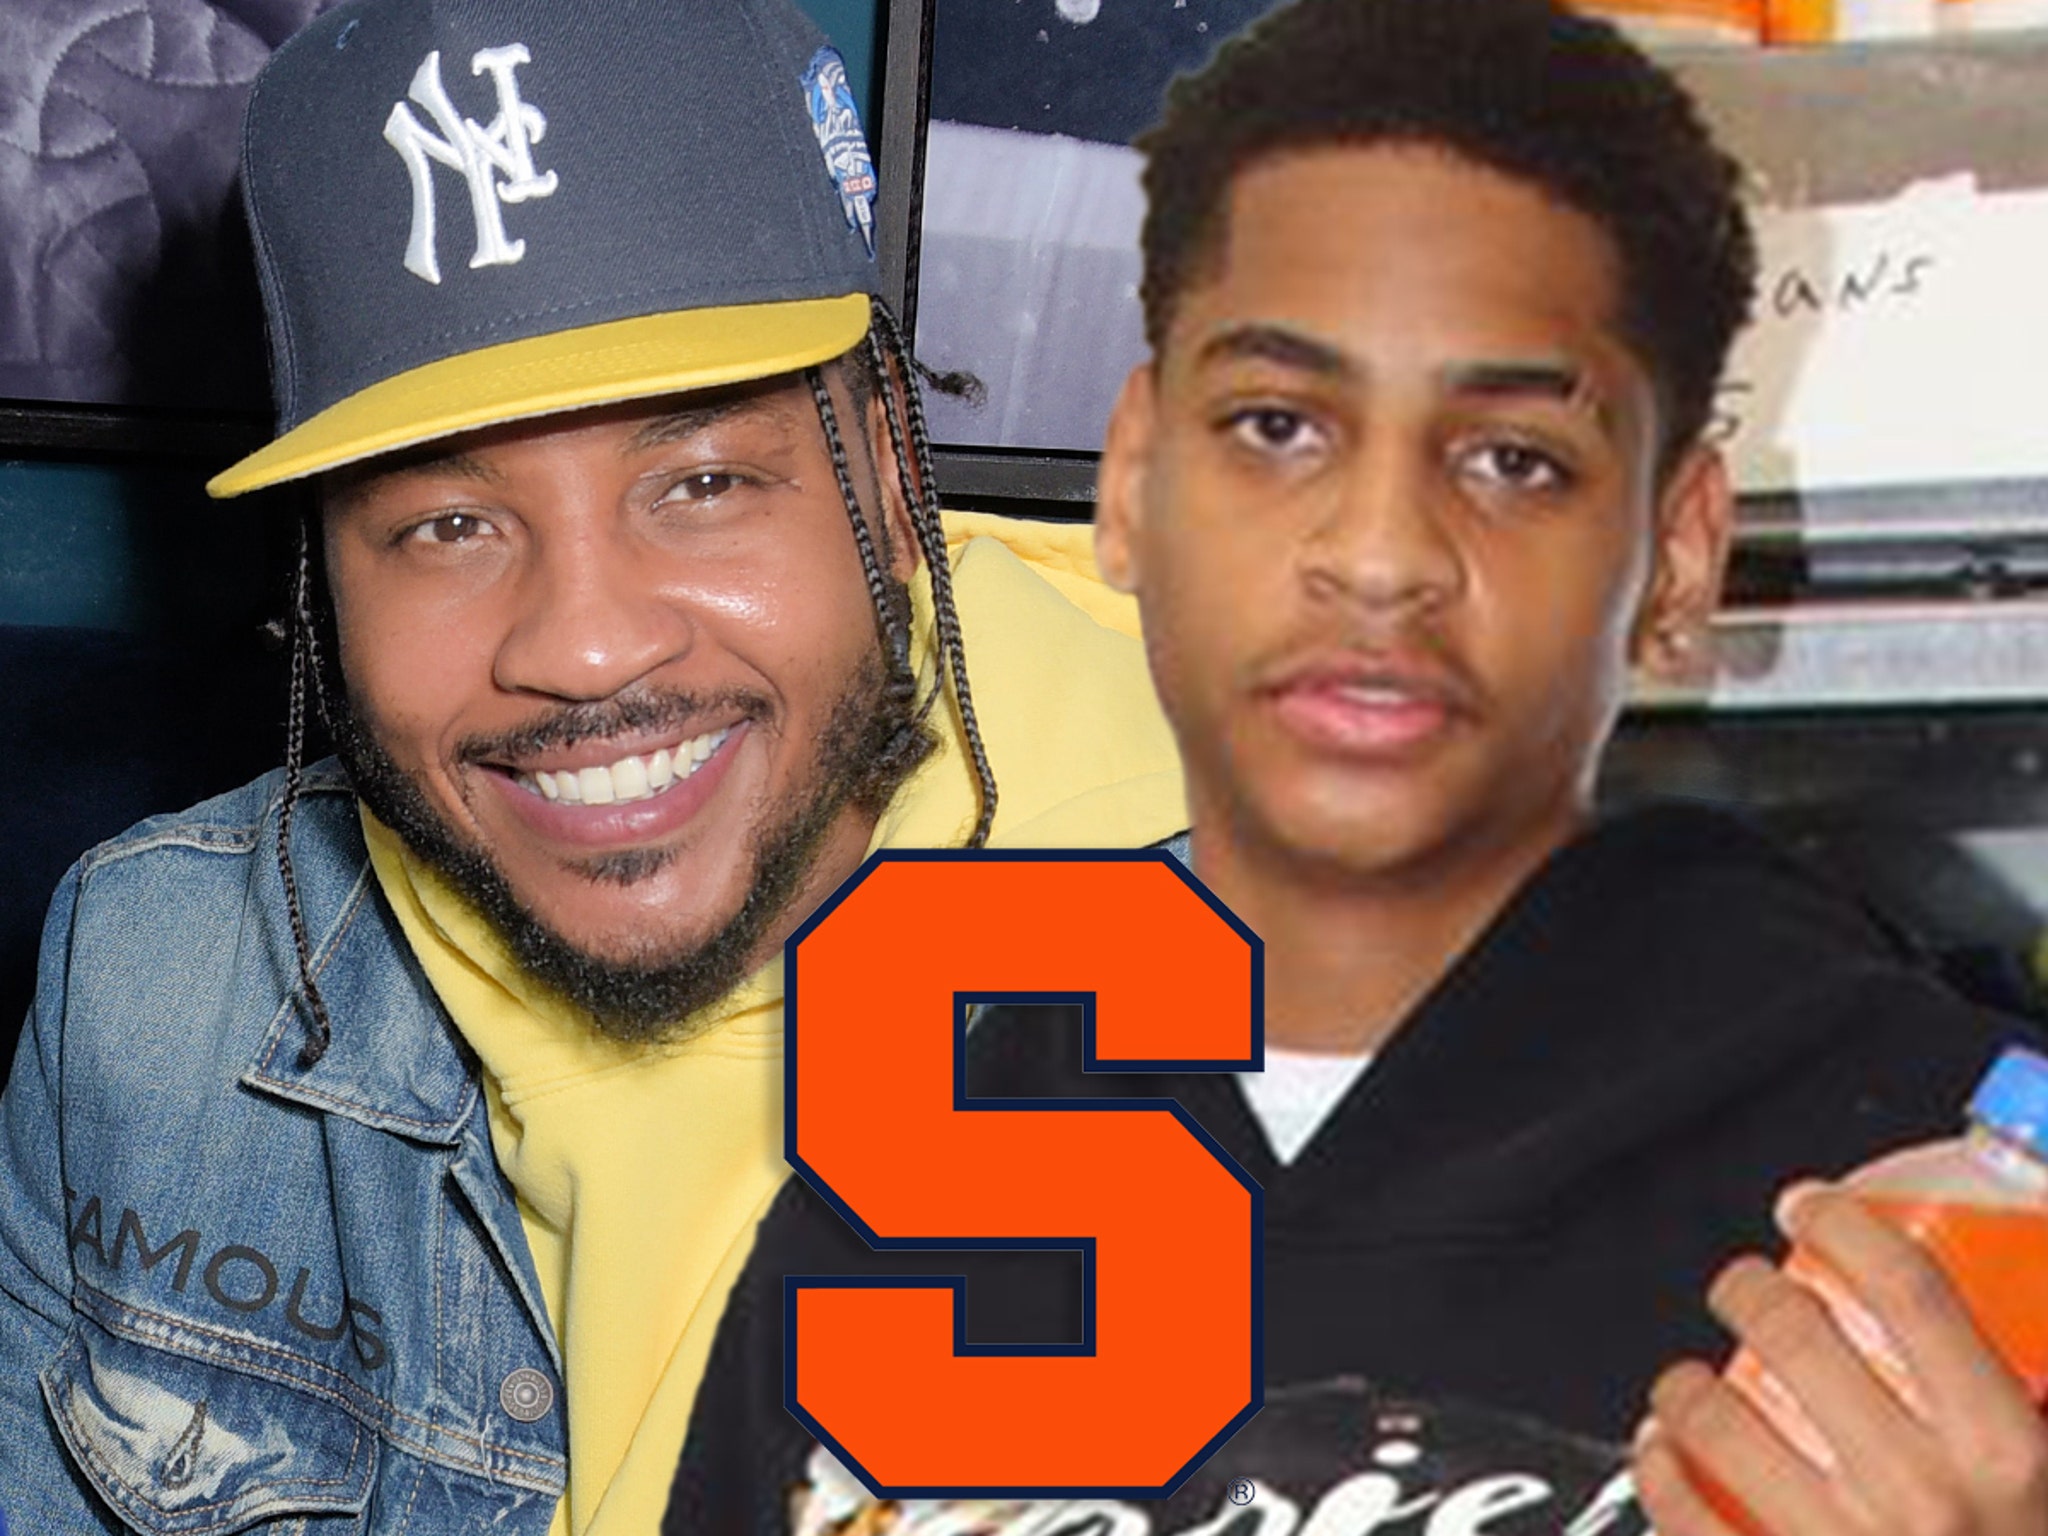 Carmelo Anthony's basketball starlet son Kiyan is handed